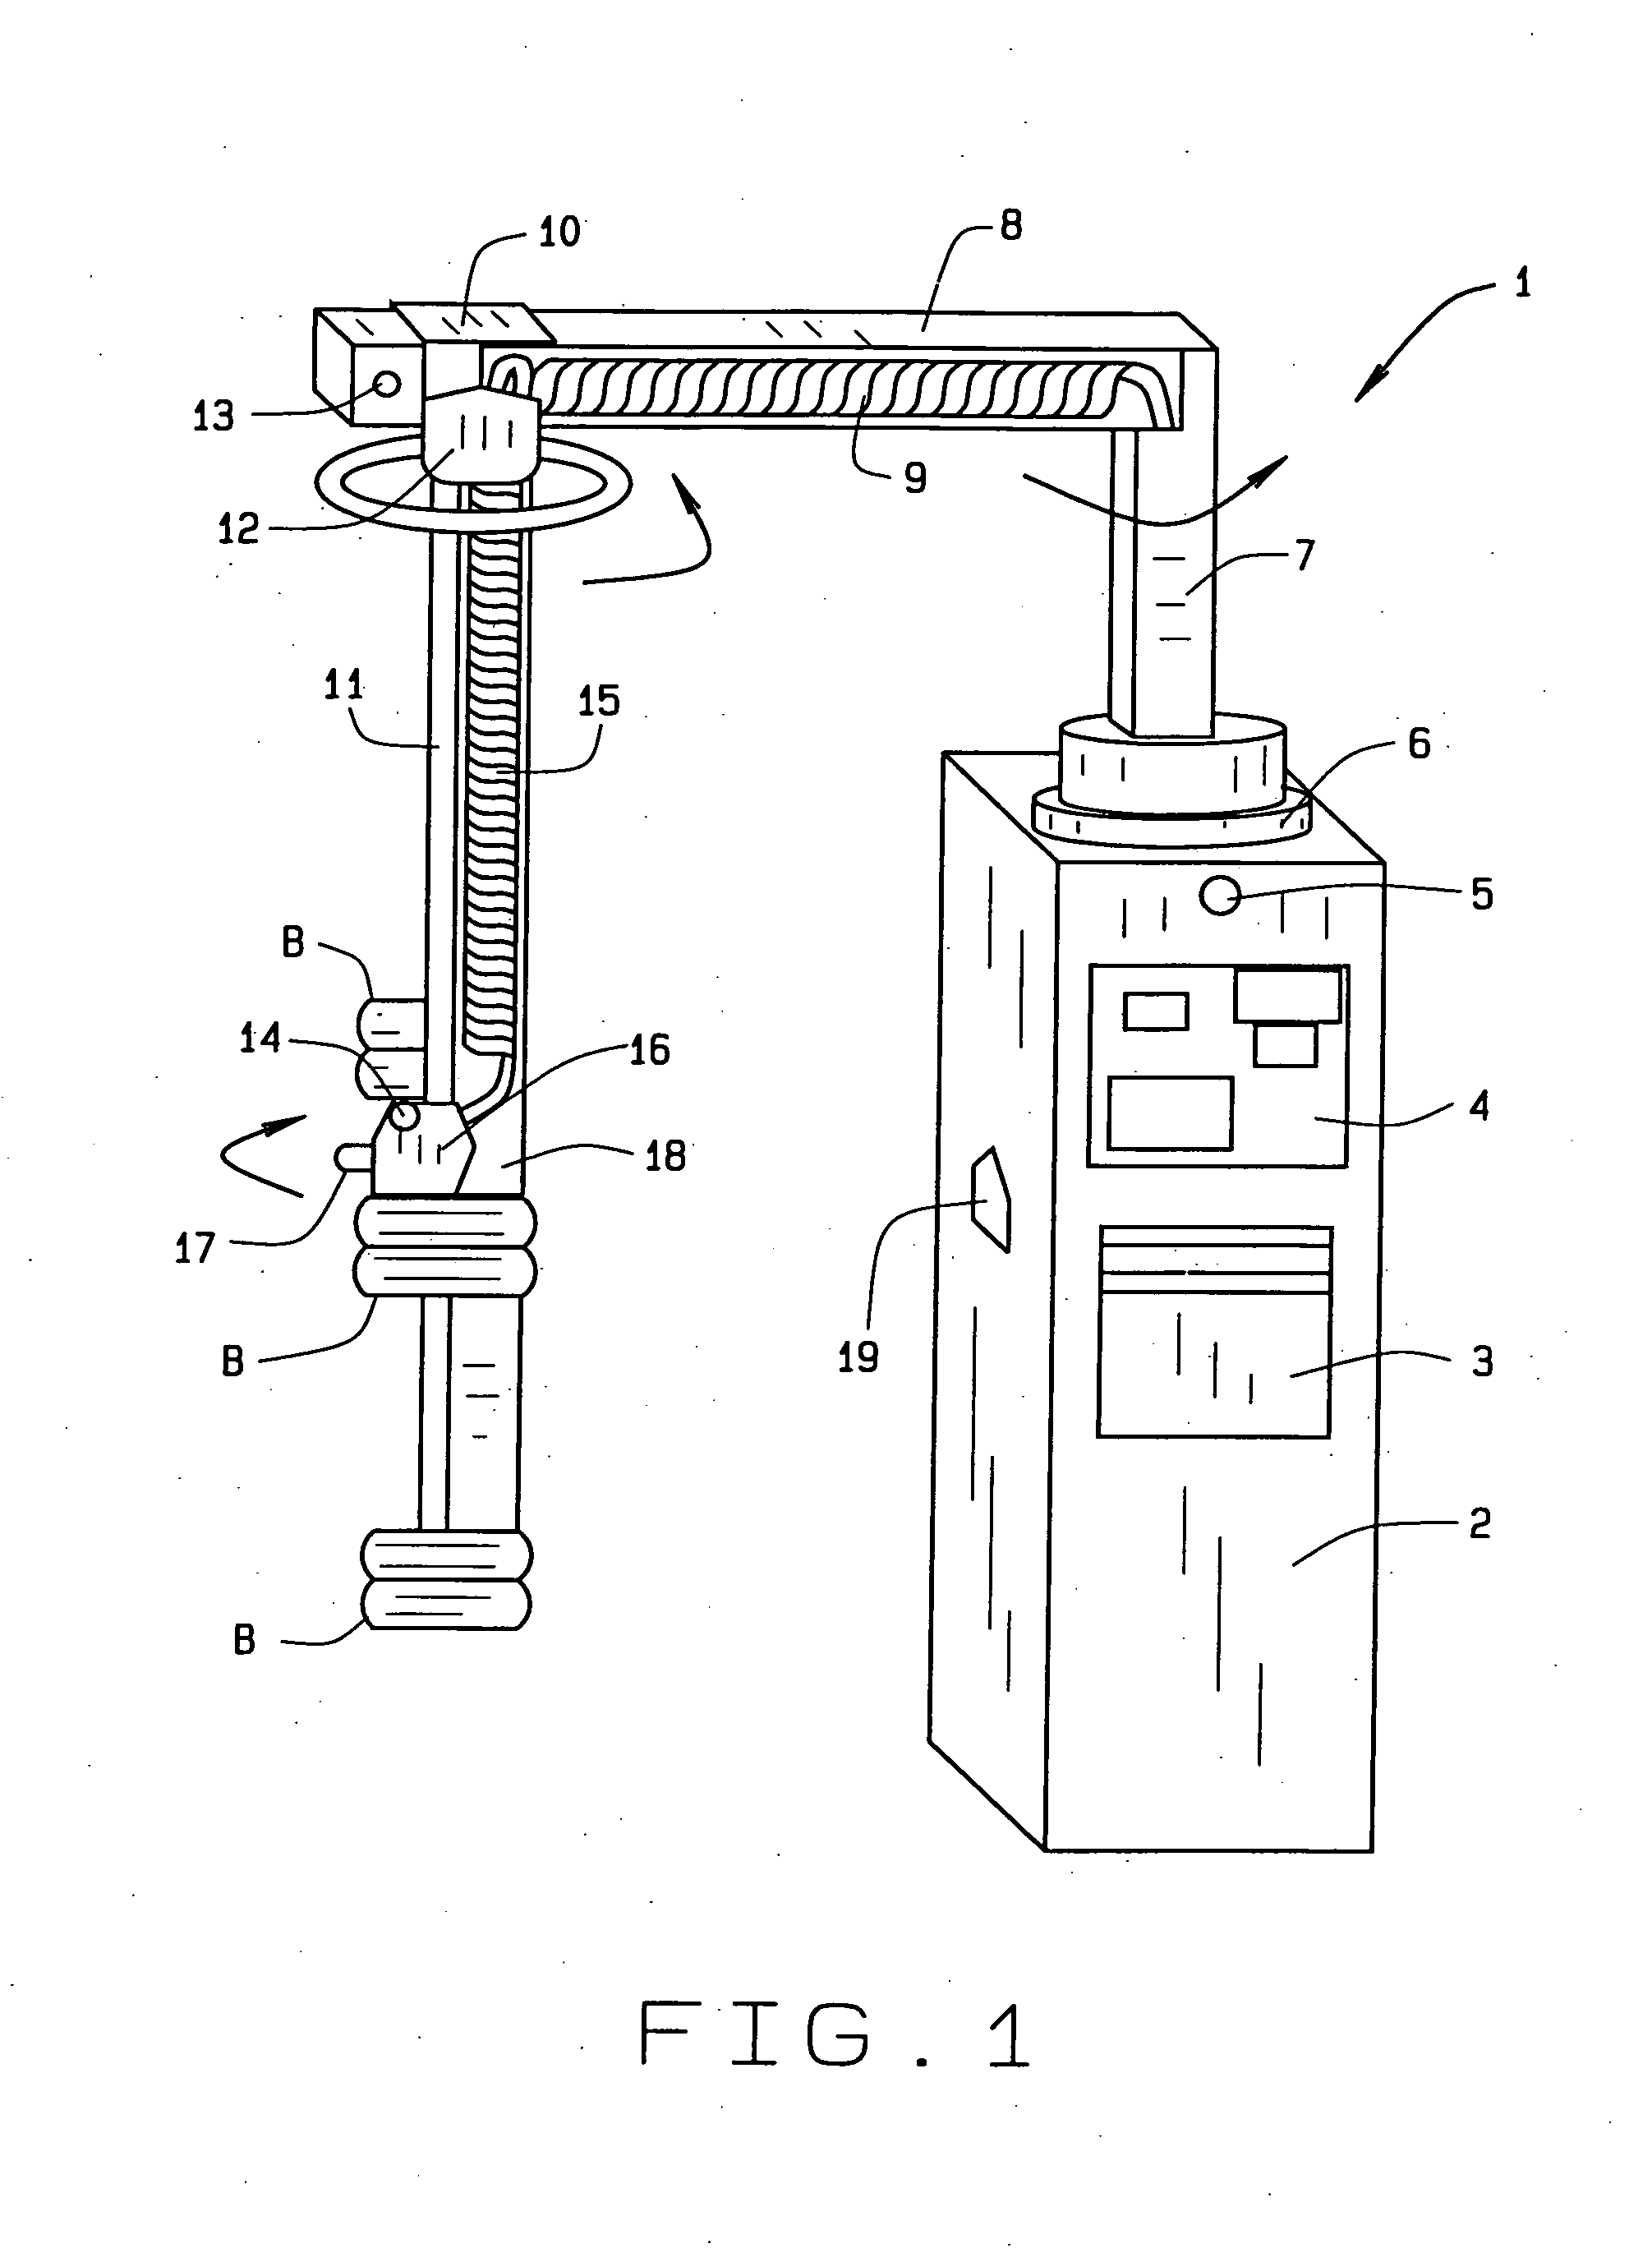 Method and process for an electric vehicle charging system to automatically engage the charging apparatus of an electric vehicle